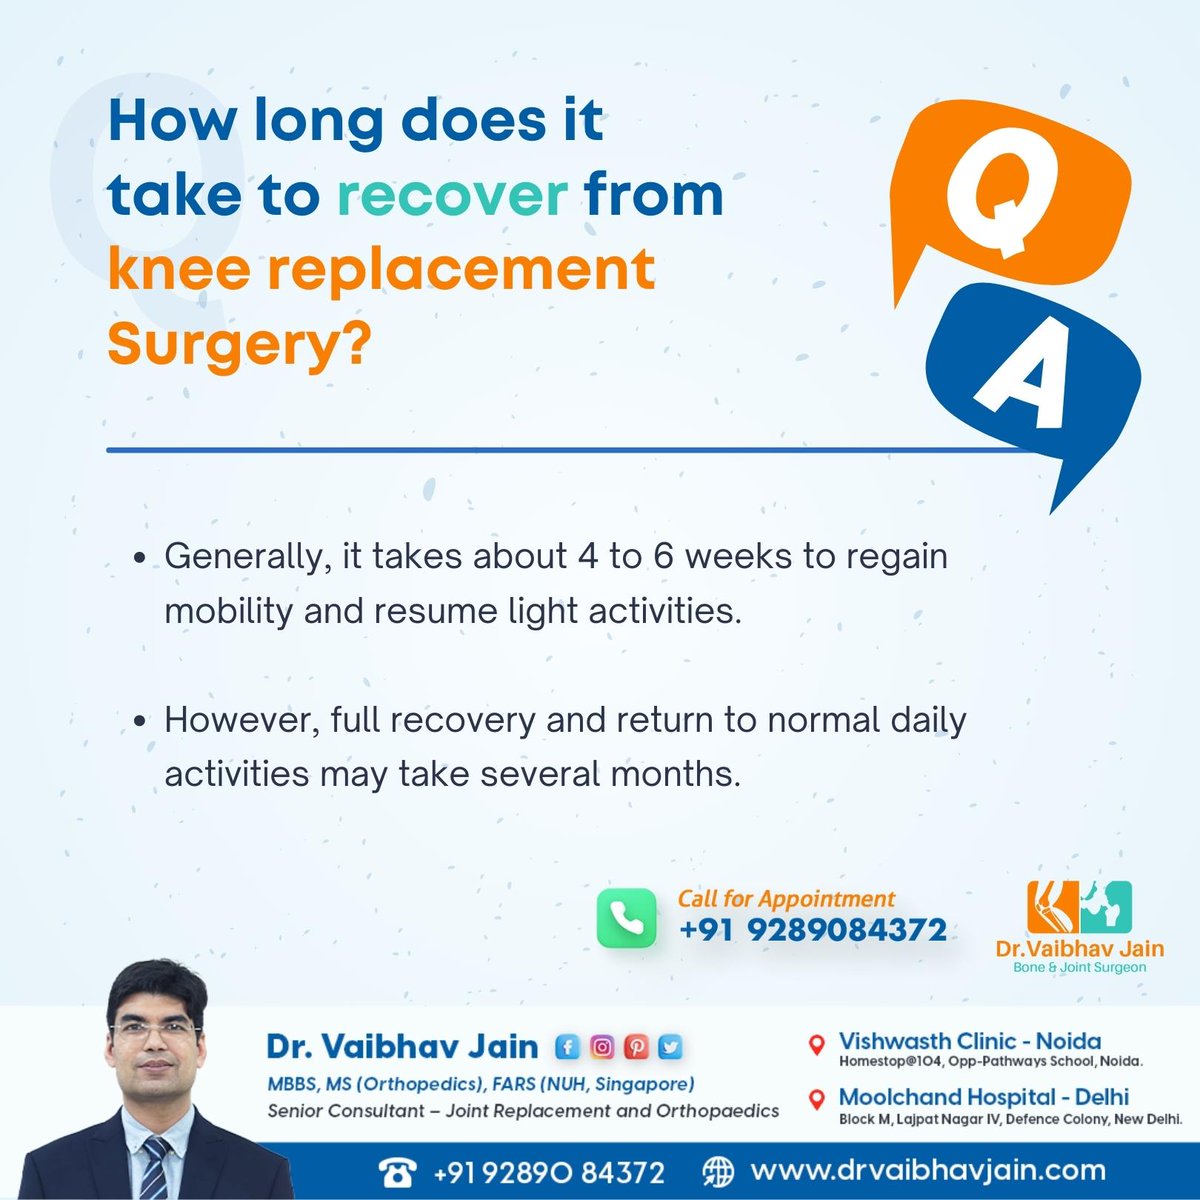 Wondering about Knee Replacement Surgery Recovery Time? Let's Find Out!

📌 For an Appointment Visit: drvaibhavjain.com

#DrVaibhavJain #KneeReplacementRecovery #SurgeryRecoveryTime #OrthopedicCare #HealthyKnee #GetBackOnYourFeet #RehabilitationJourney